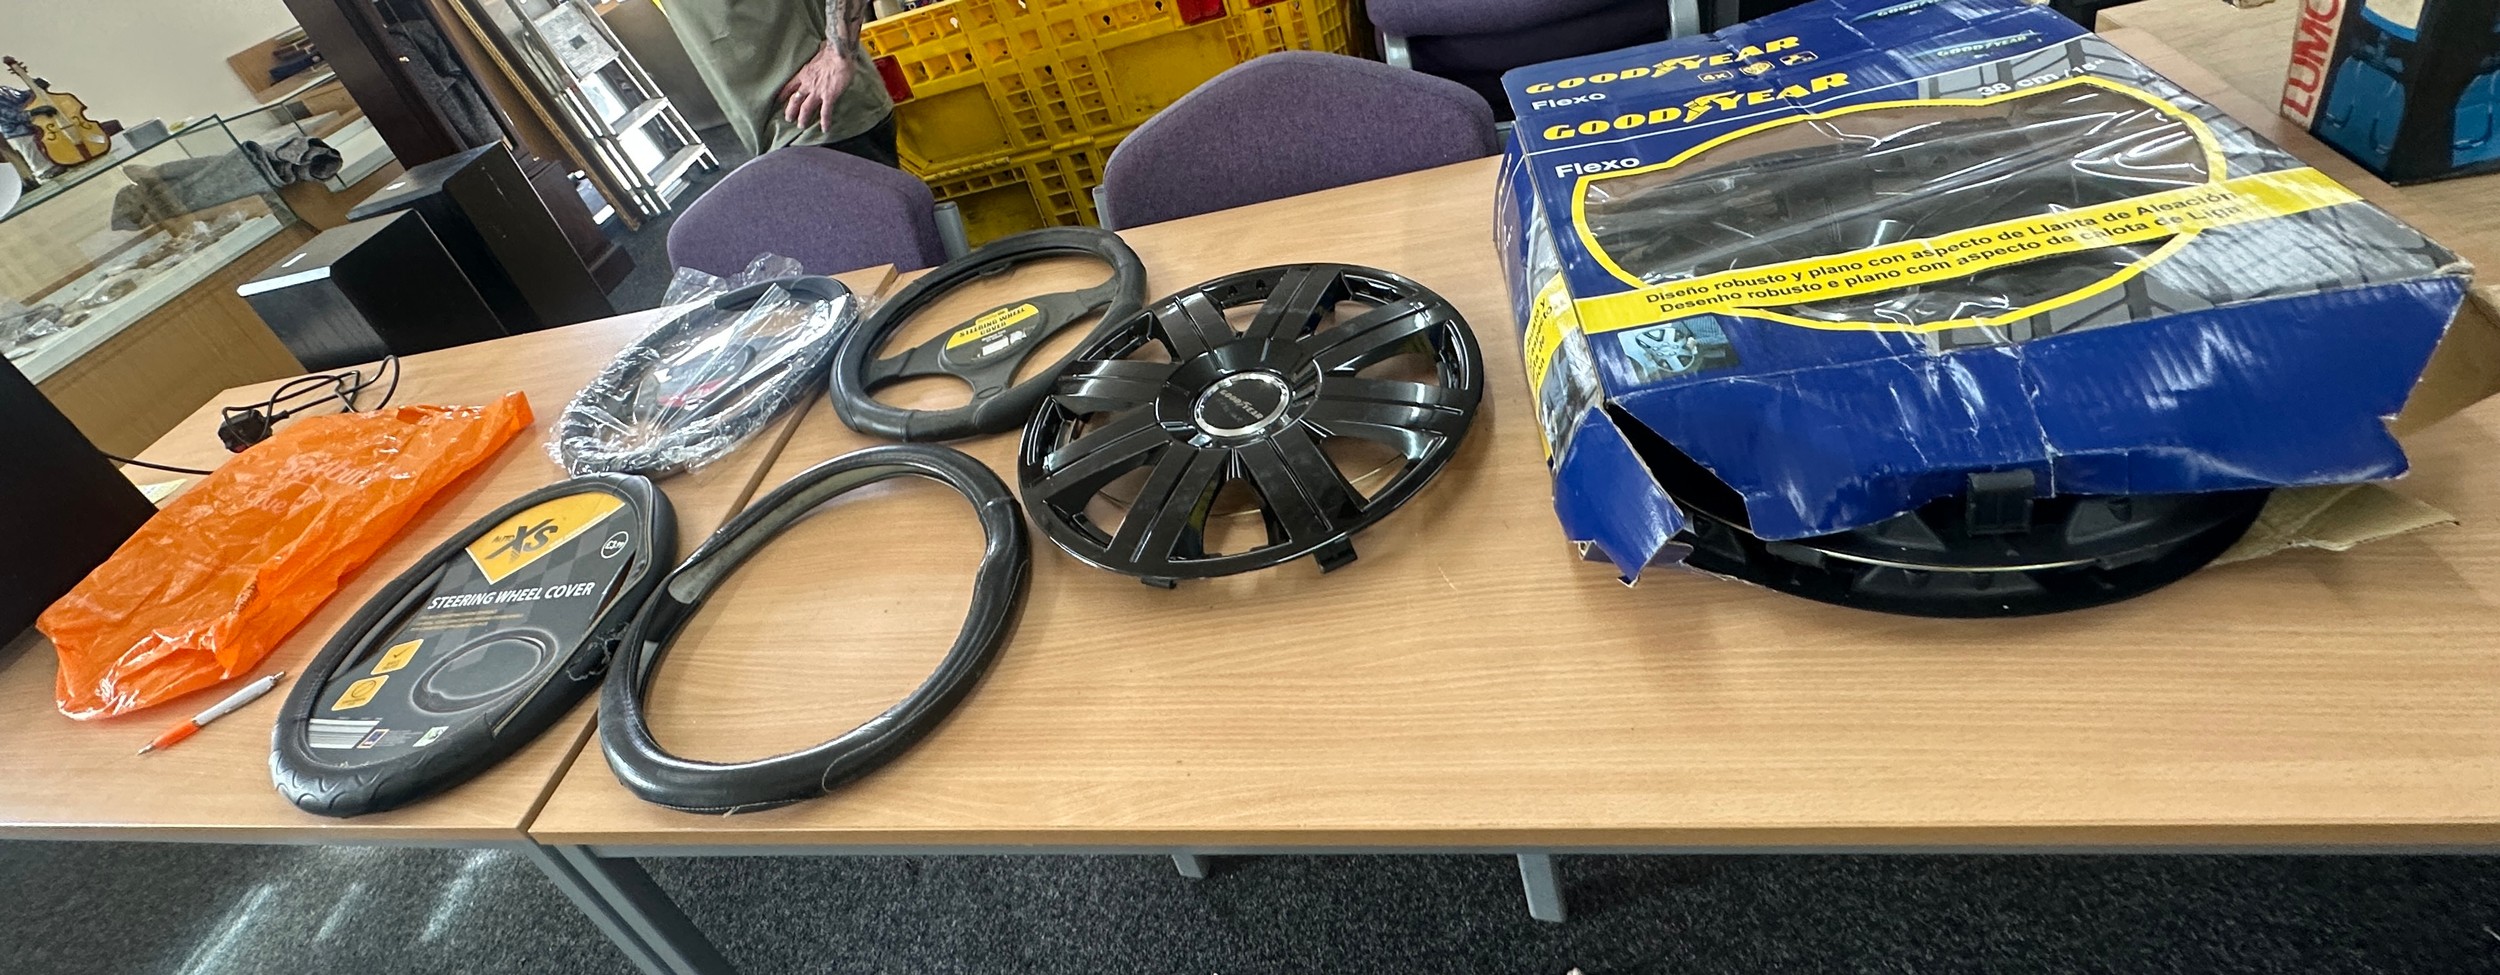 Selection of steering wheel covers and good year Flexo 15 inch wheel trims